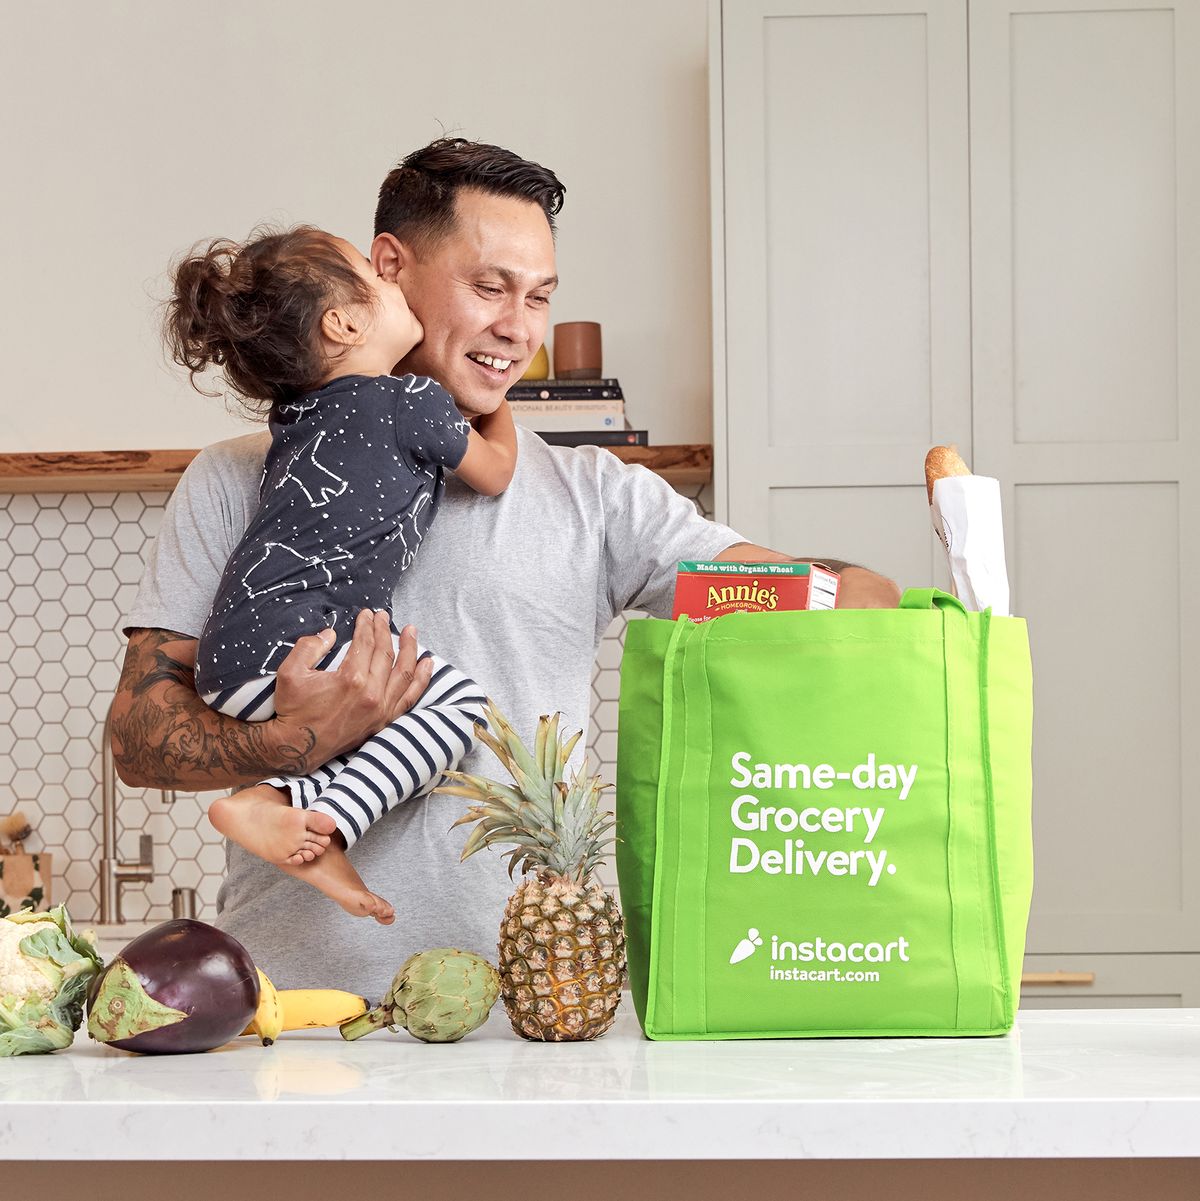 What Is Instacart and How Does It Work? - Instacart Fee, Delivery Times, and More